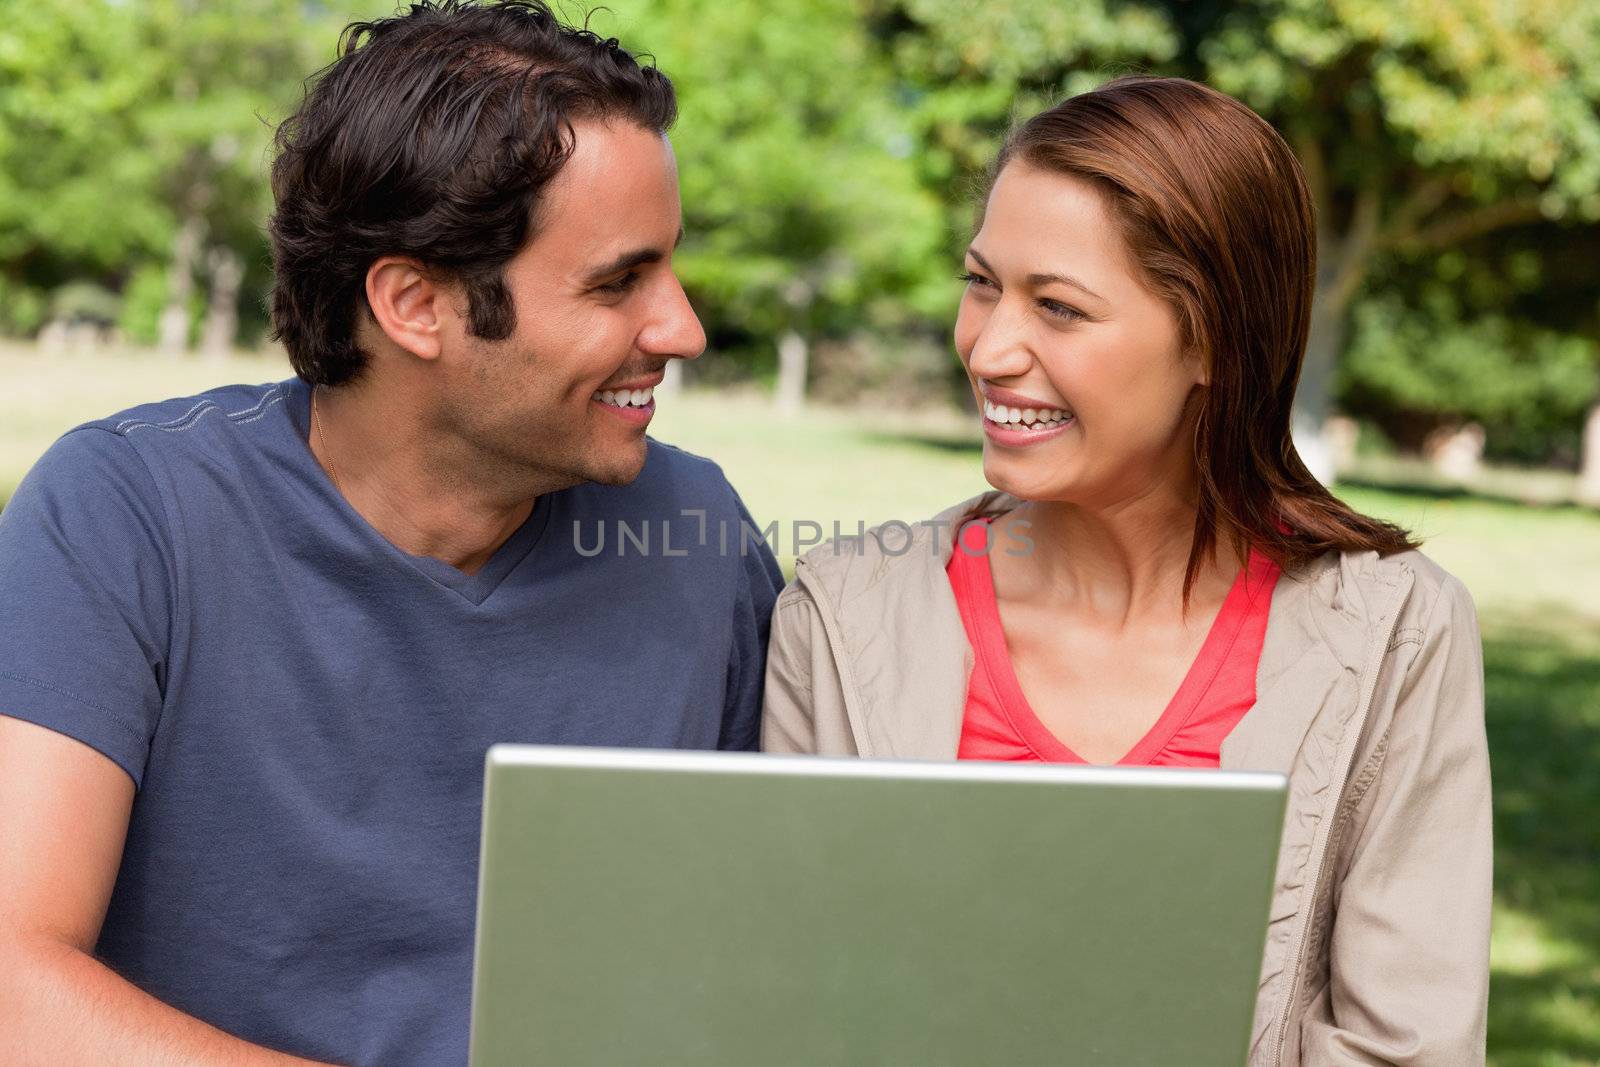 Two friends joyfully smiling as they look at each other while holding a tablet in a park on a sunny day